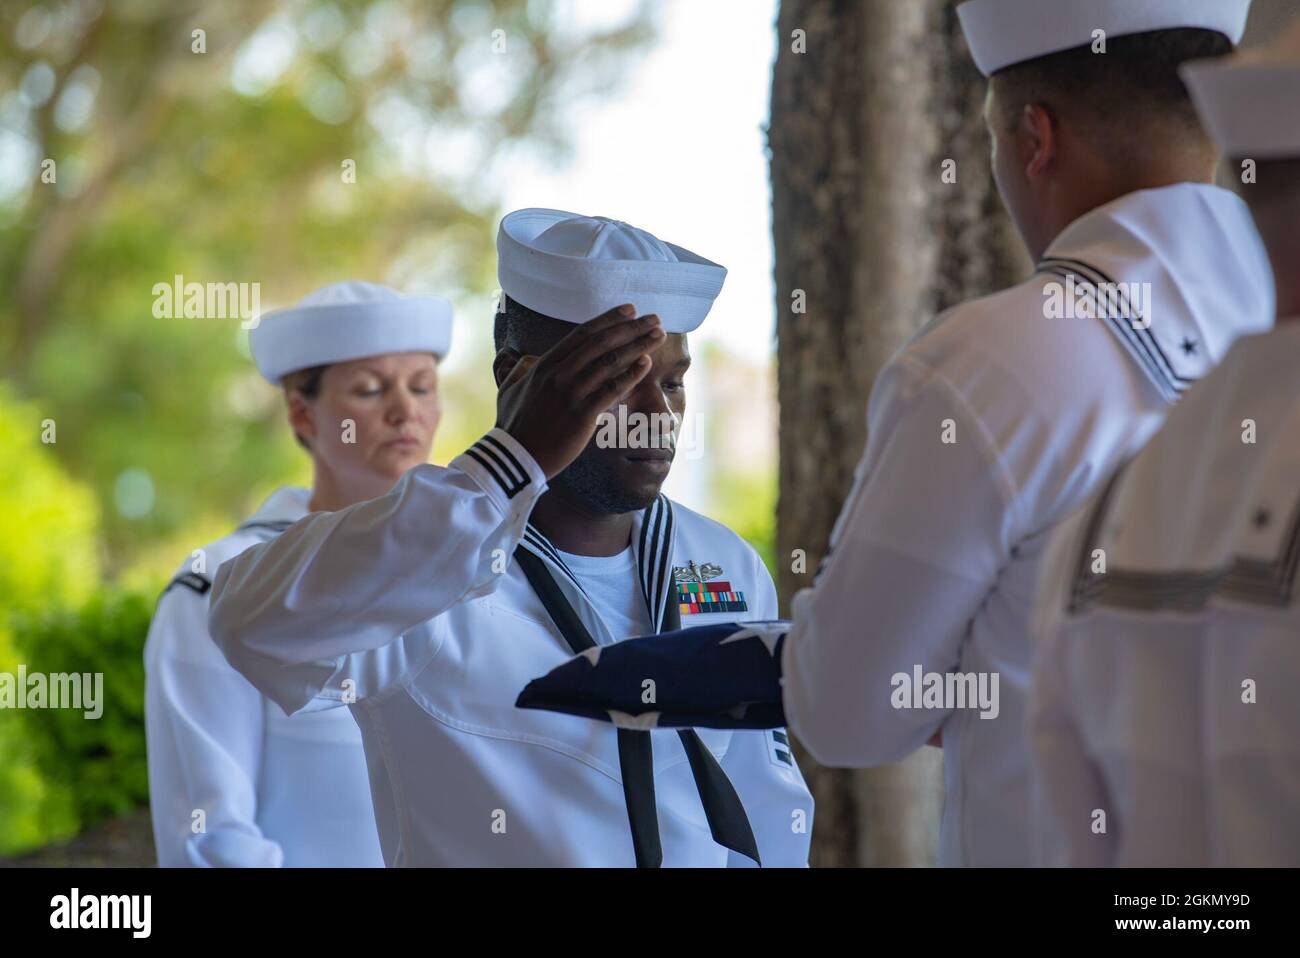 Sailors assigned to Navy Region Hawaii and the Defense POW/MIA Accounting Agency (DPAA) conduct a funeral for U.S. Navy Bandmaster James B. Booe, 42, of Veedersburg, Indiana, at the National Memorial Cemetery of the Pacific, Honolulu, Hawaii, June 1, 2021. Booe was assigned to the USS Oklahoma which sustained fire from Japanese aircraft and multiple torpedo hits causing the ship to capsize and resulted in the deaths of more than 400 crew members on Dec. 7, 1941, at Ford Island, Pearl Harbor. Booe was recently identified through DNA analysis by the DPAA forensic laboratory and laid to rest with Stock Photo